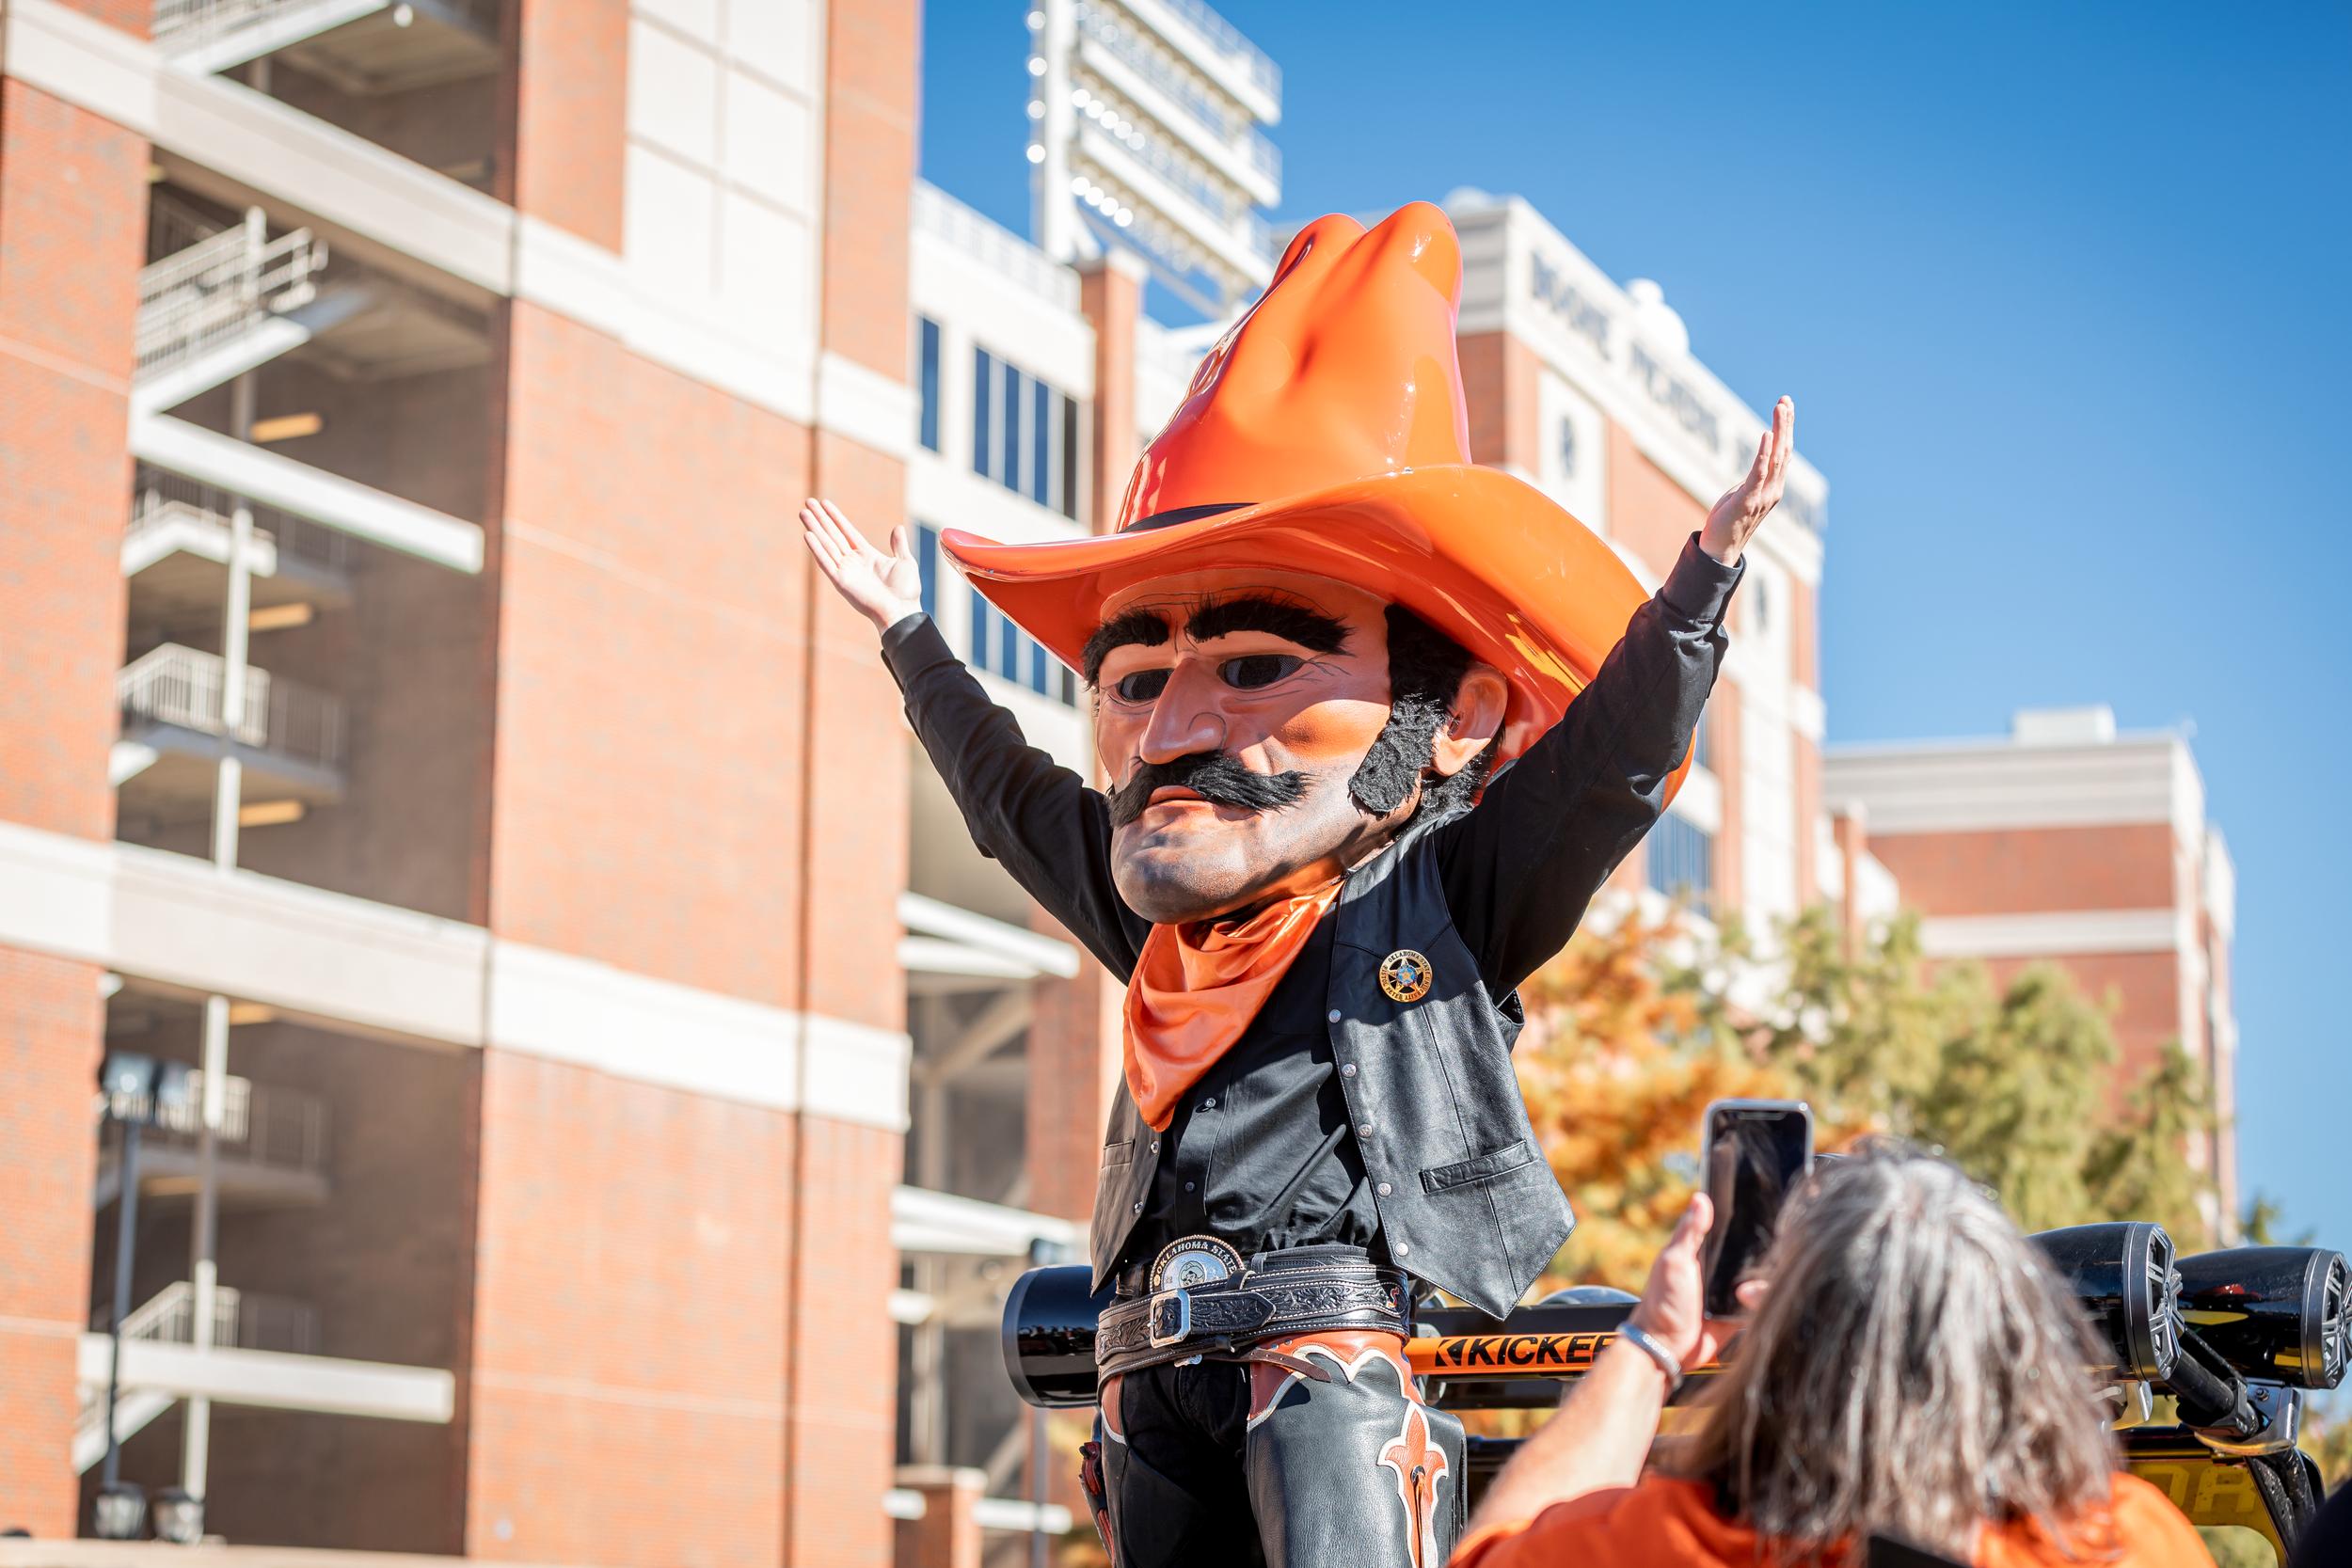 Pistol Pete acknowledging OSU fans with pride and excitement